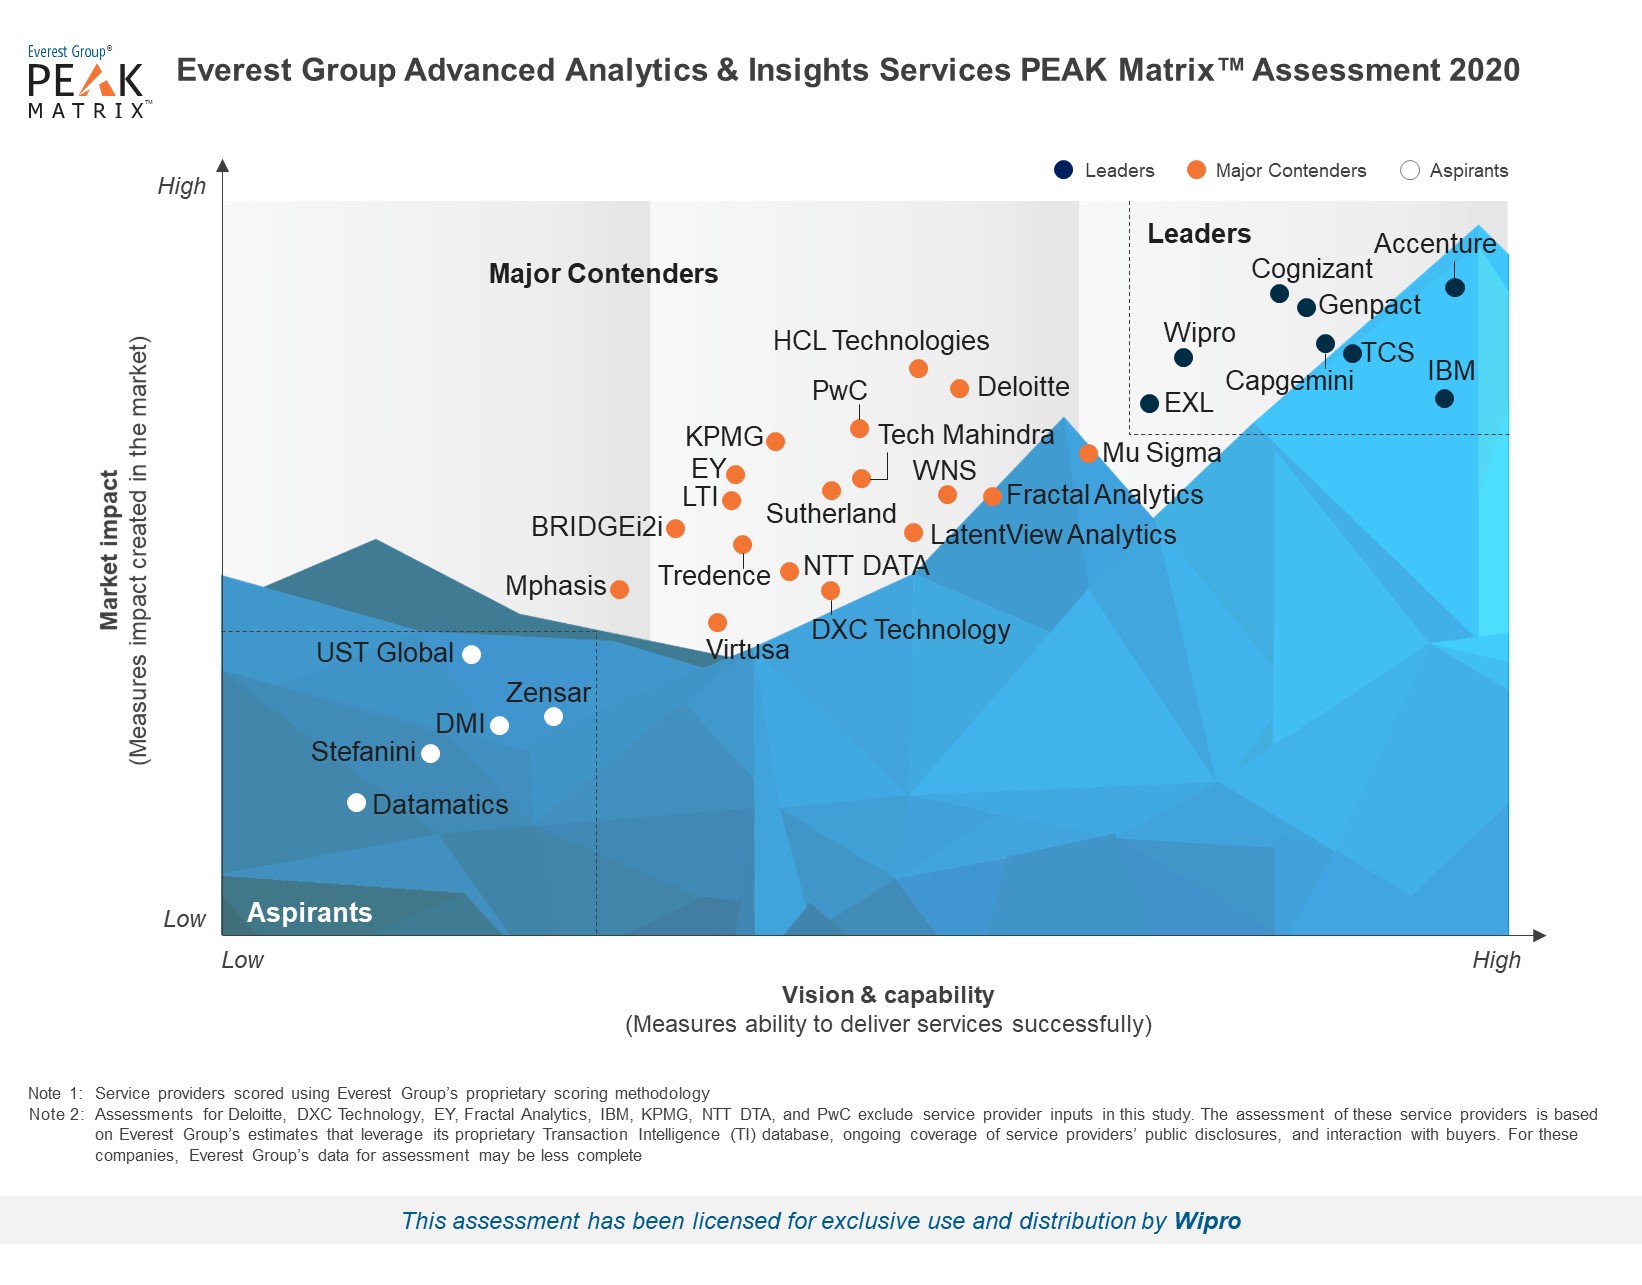 Wipro is a Leader in Advanced Analytics & Insights Services 2020